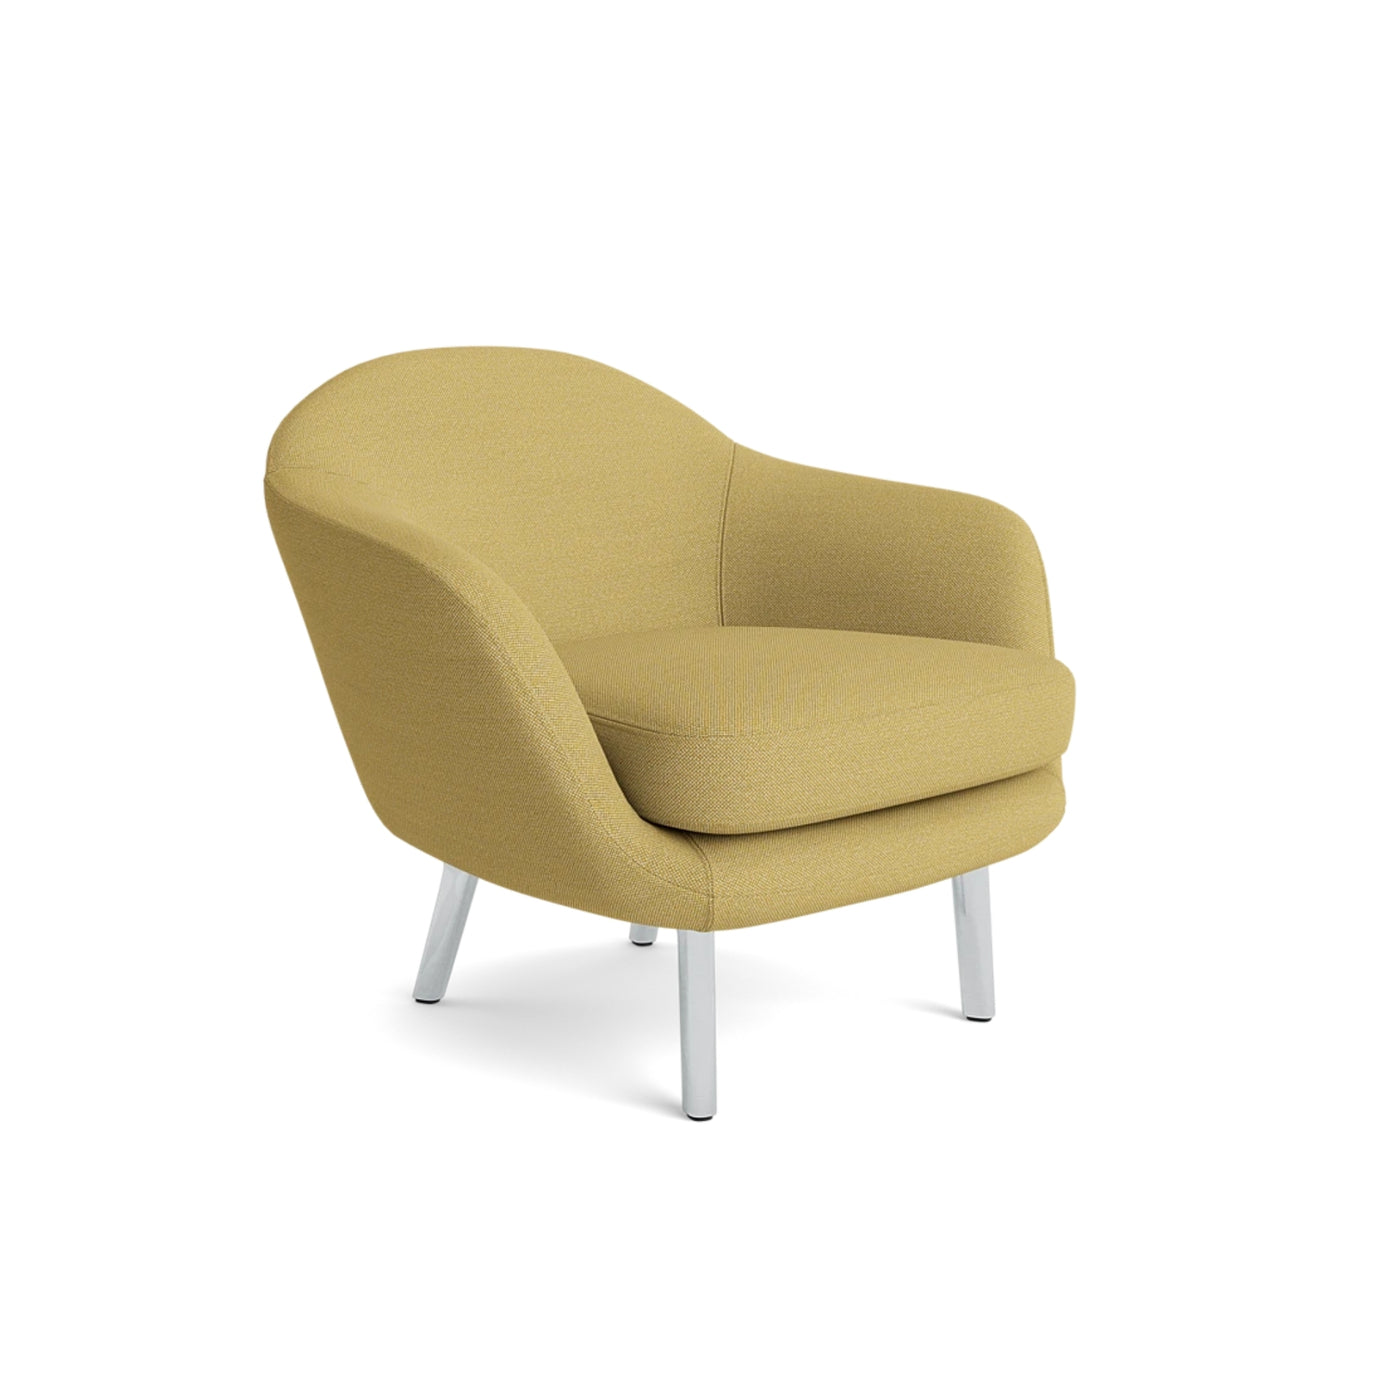 Normann Copenhagen Sum Armchair. Made to order at someday designs. #colour_hallingdal-407